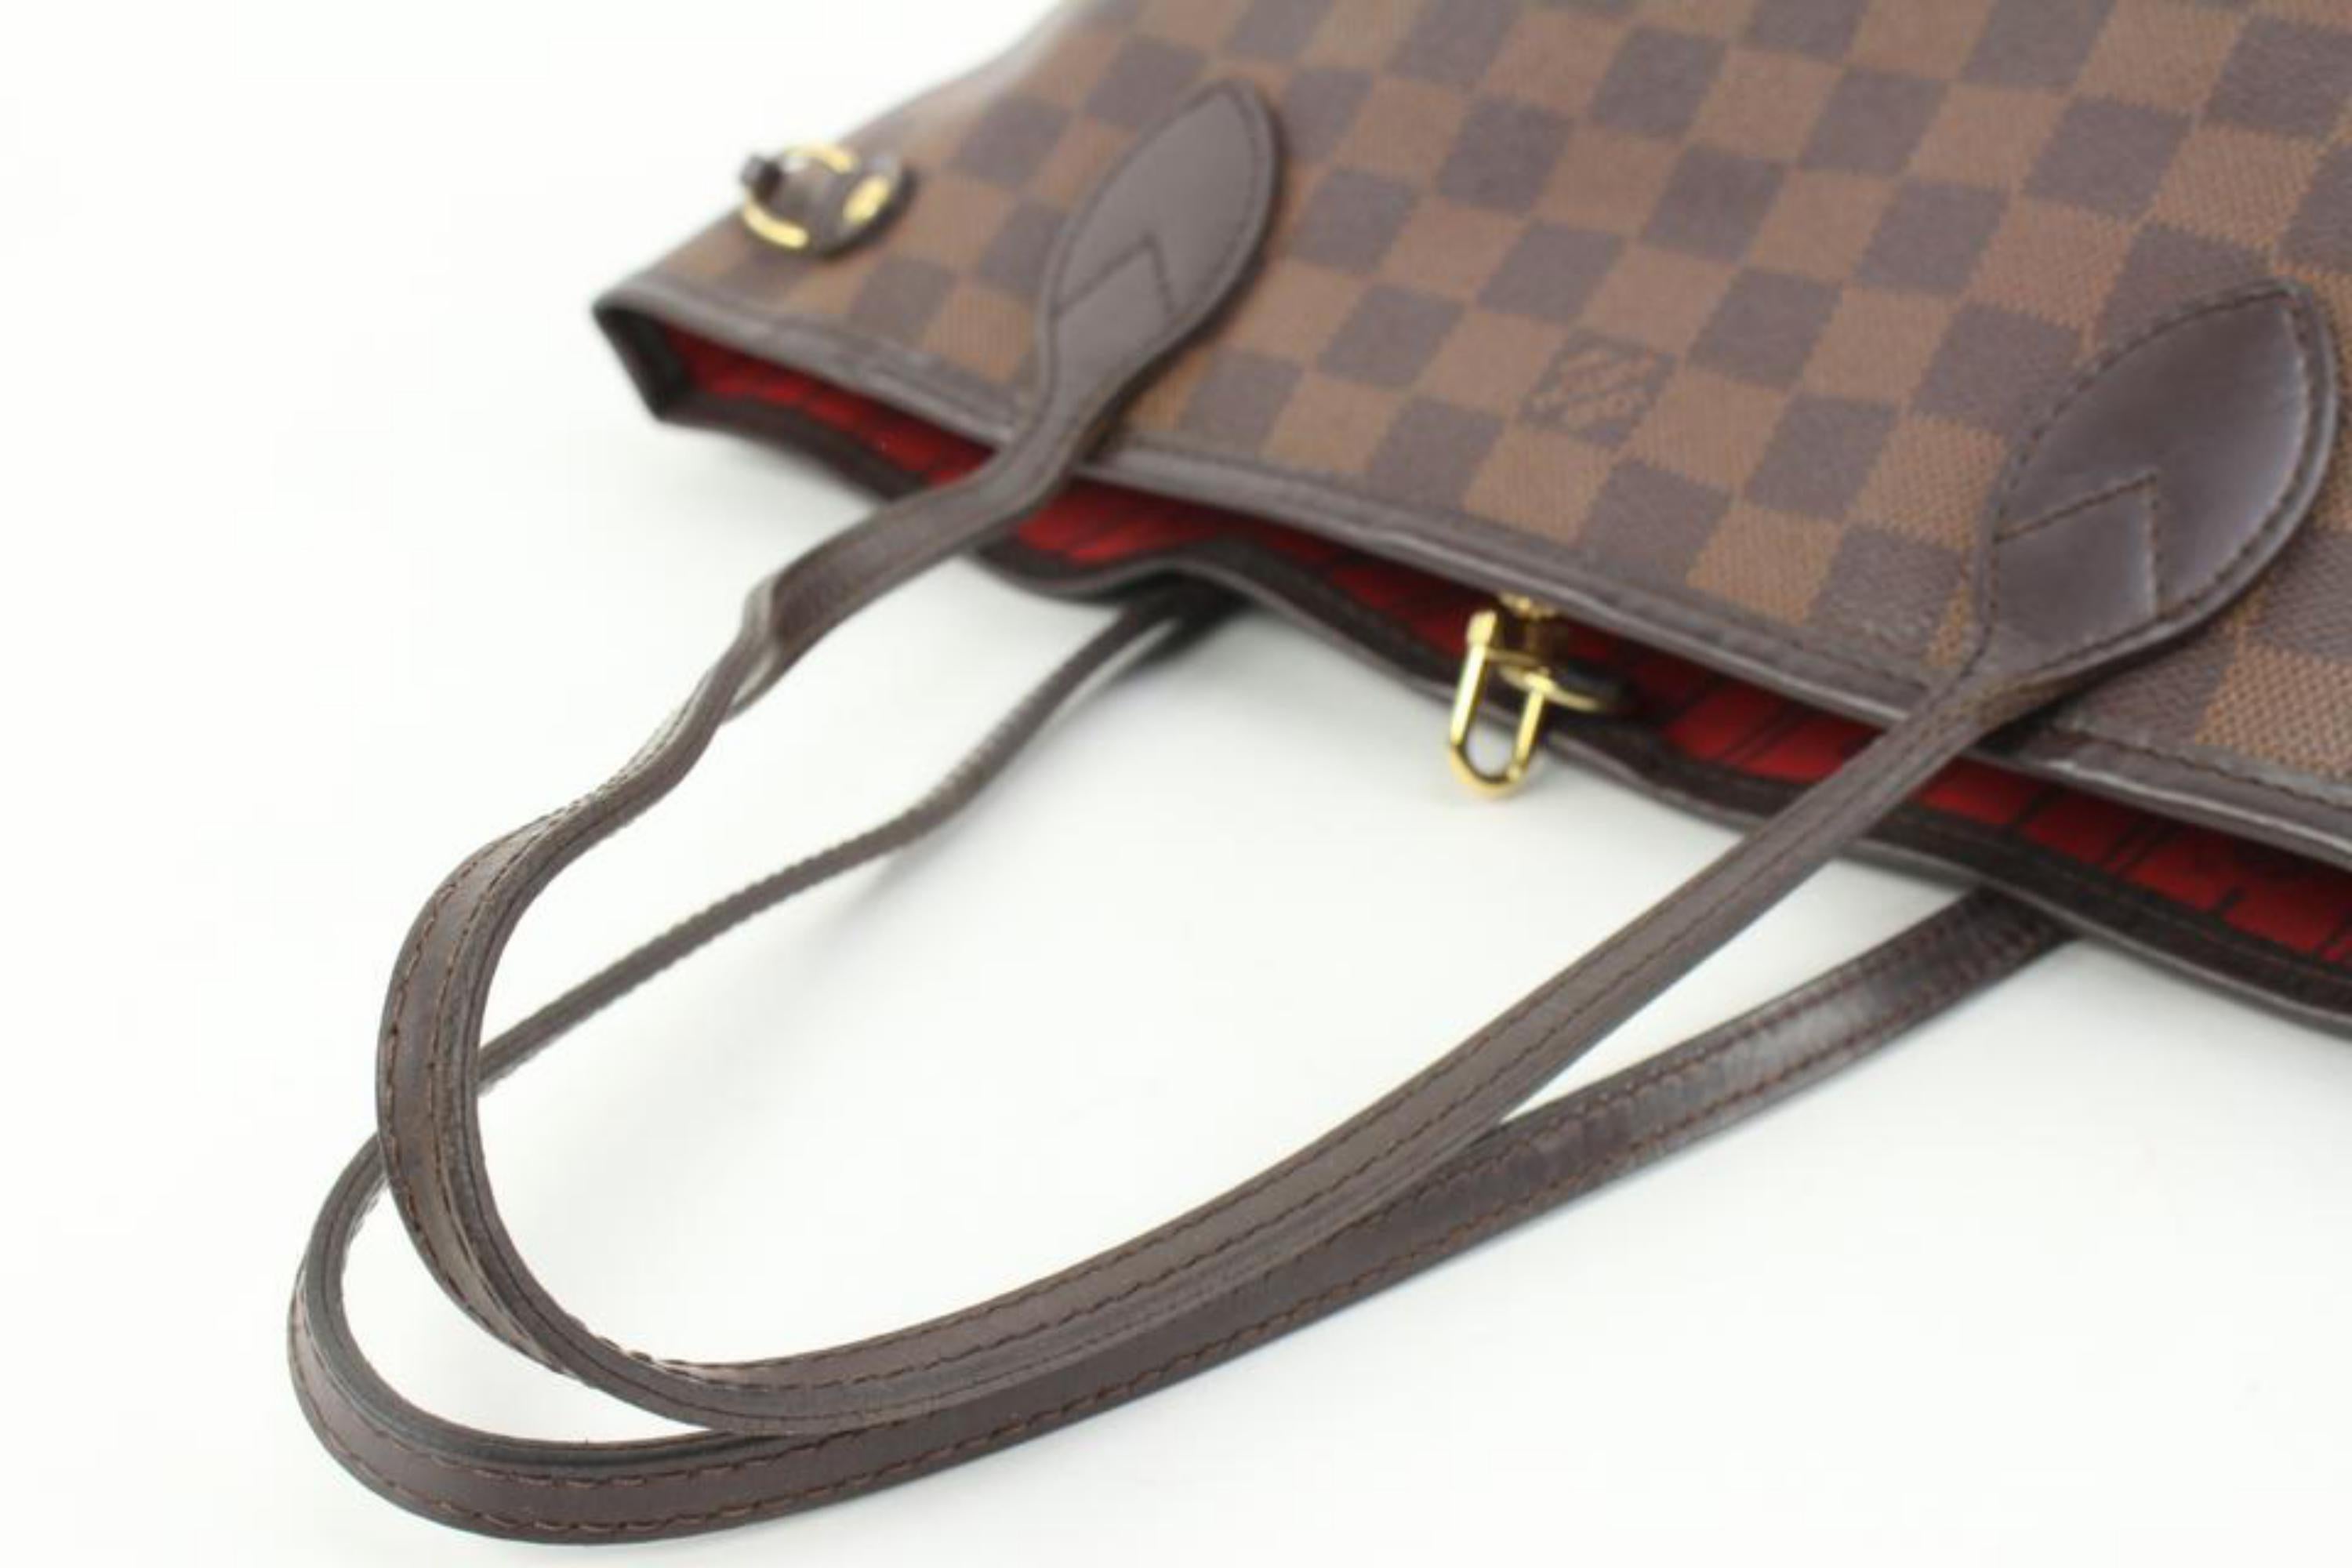 Louis Vuitton Small Damier Ebene Neverfull PM Tote Bag 4lv34s In Good Condition For Sale In Dix hills, NY